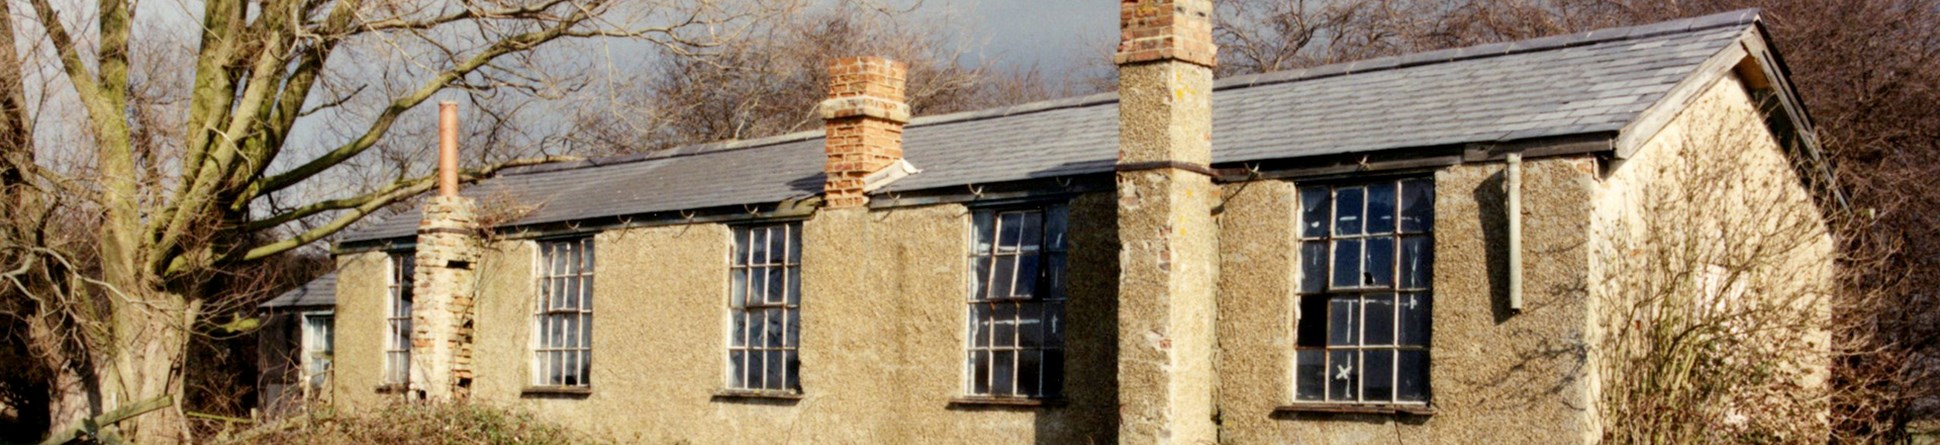 Stow Maries airfield, Essex, the single storey non-commissioned officers’ quarters, with its cast iron windows, projecting chimney stacks and slate roof remains virtually unaltered from a century ago